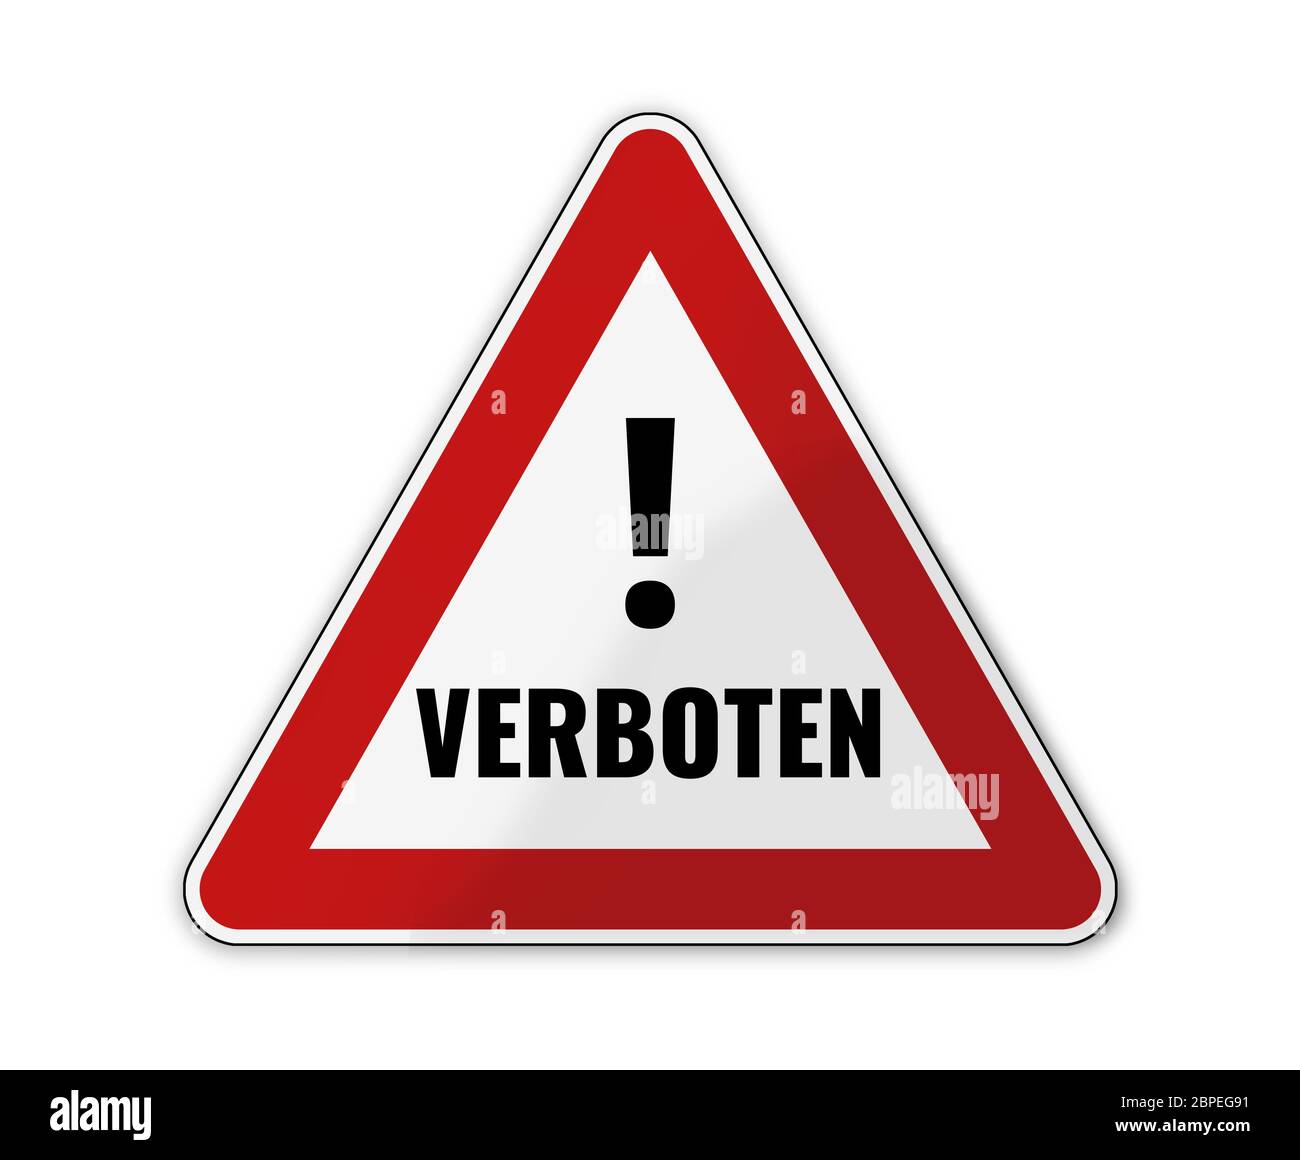 Page 5 German Language Signs High Resolution Stock Photography And Images Alamy